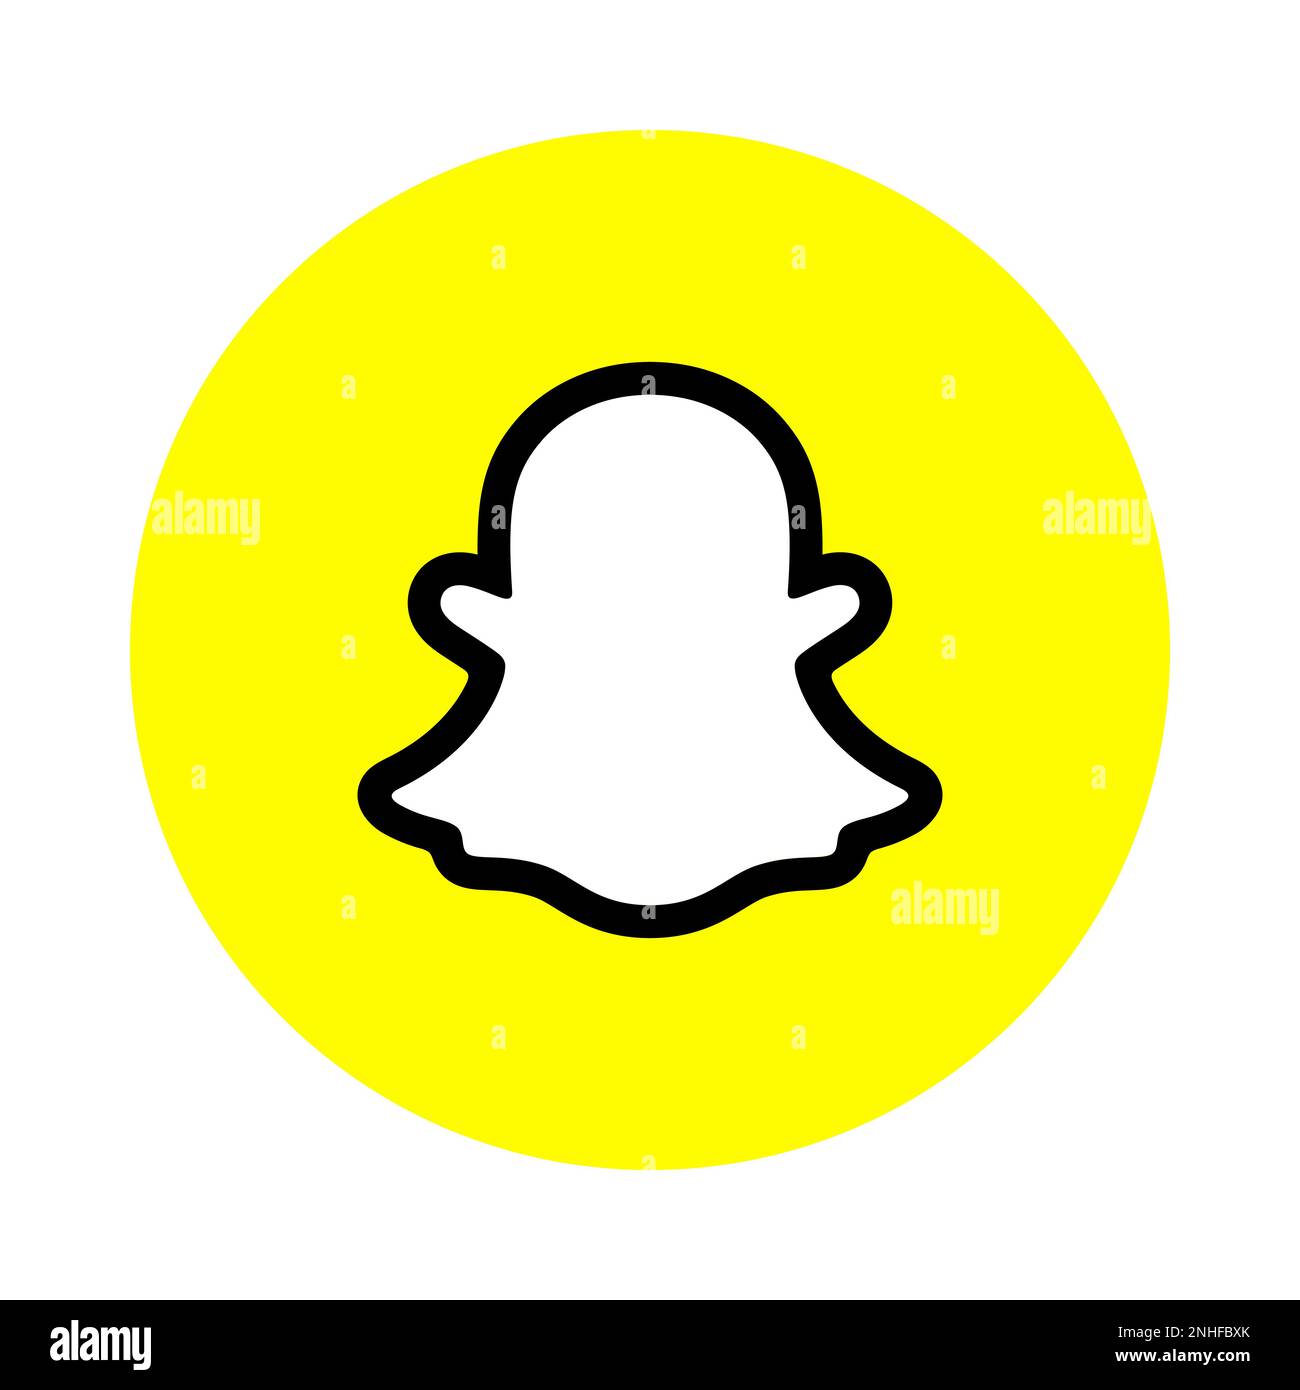 Snapchat instant messaging app icon. Square shape vector illustration. Stock Vector